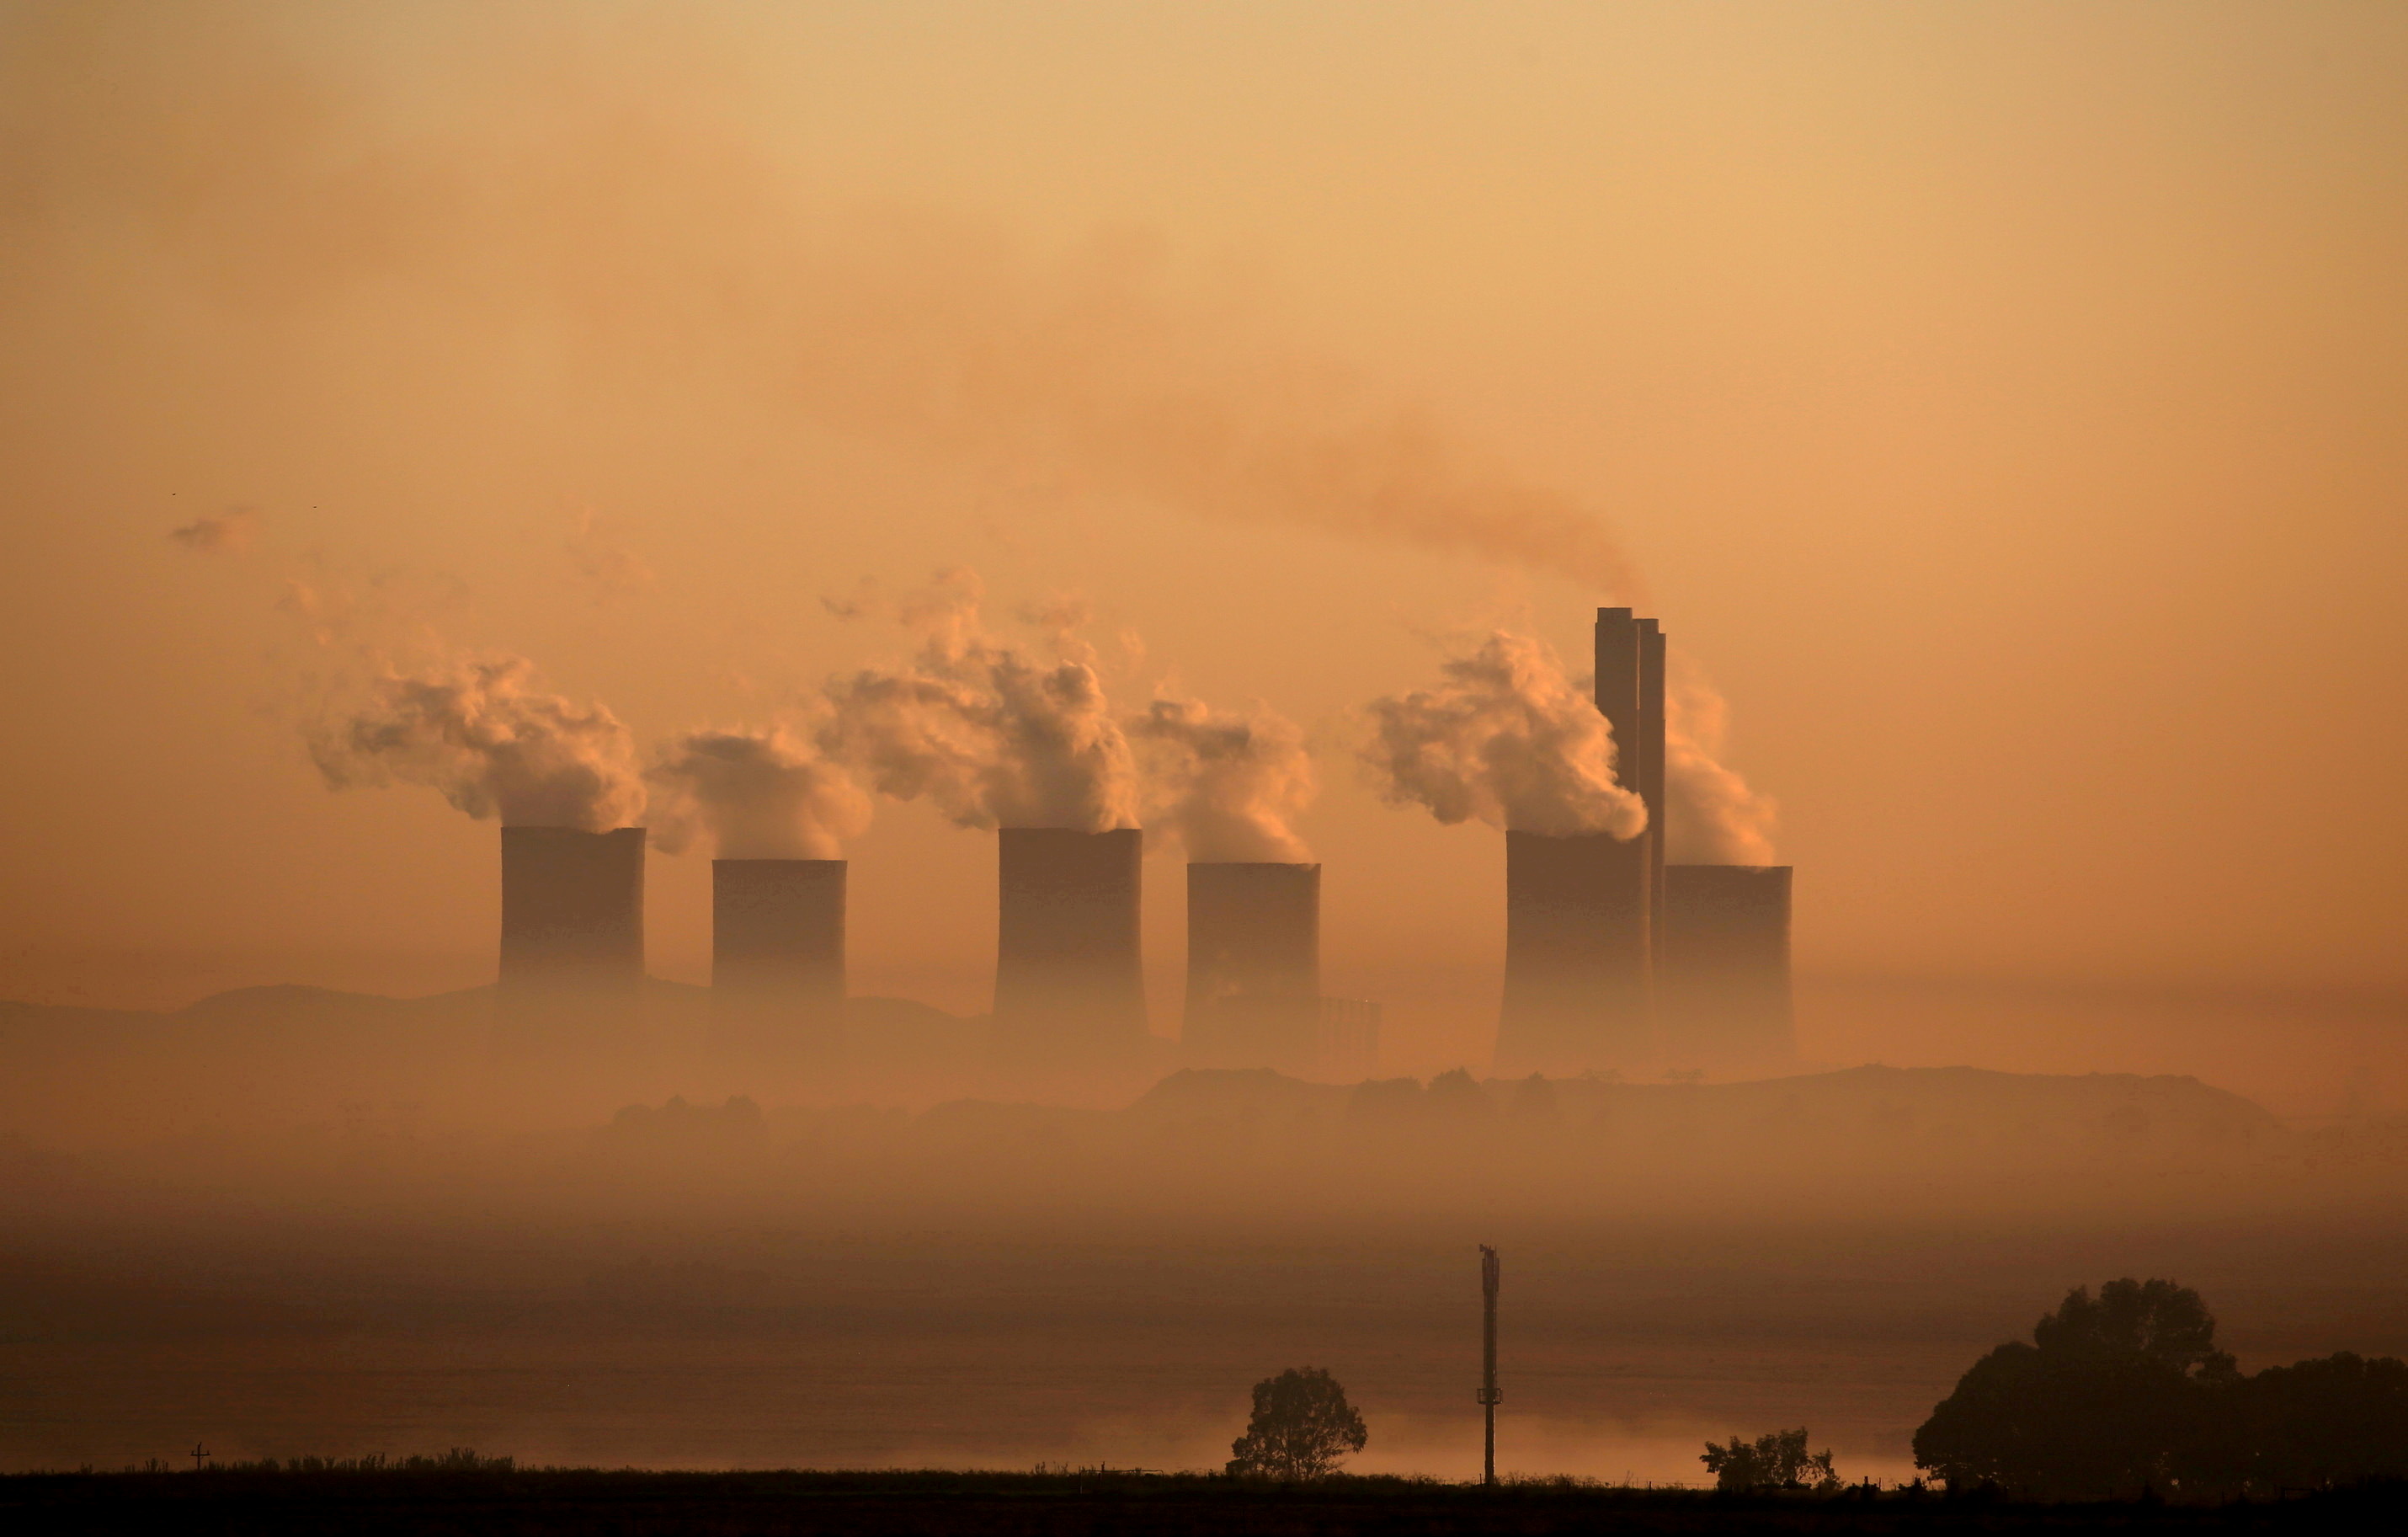 Steam rises at sunrise from the  Lethabo Power Station, a coal-fired power station owned by state power utility ESKOM near Sasolburg